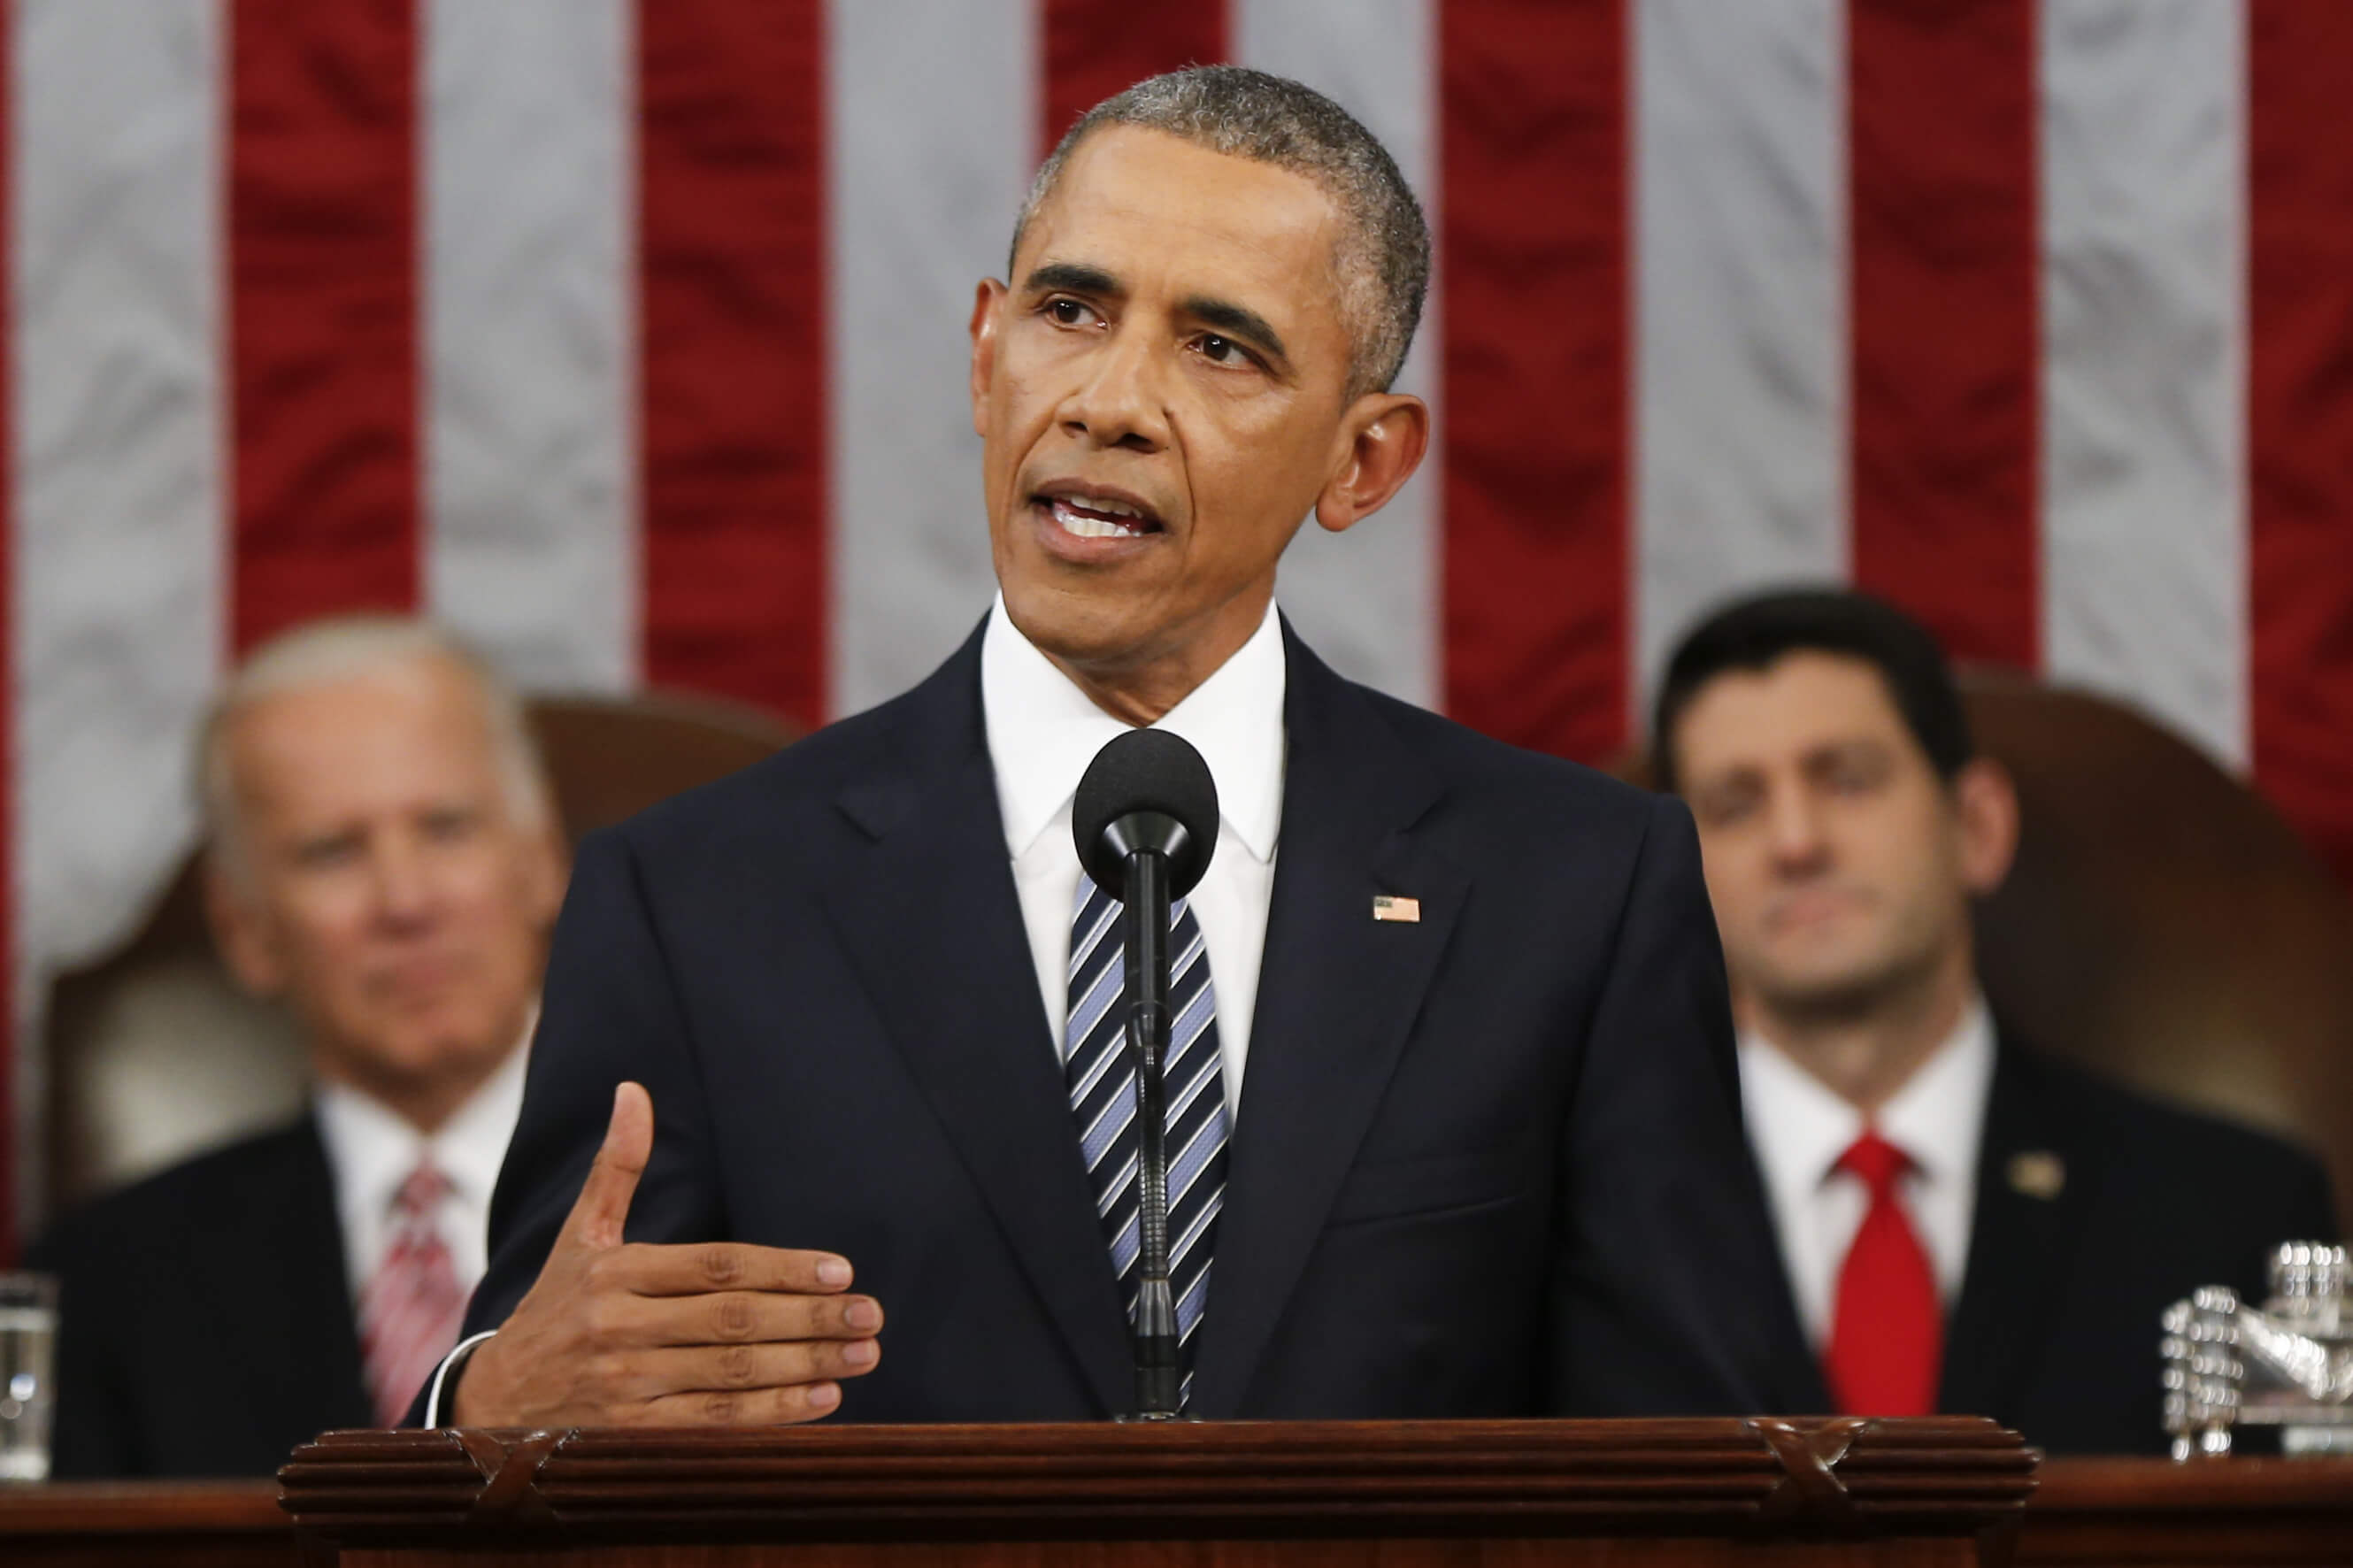 President Barack Obama delivers his State of the Union address before a joint session of Congress on Capitol Hill in Washington, Tuesday, January 12, 2016. (AP Photo/Evan Vucci, Pool)